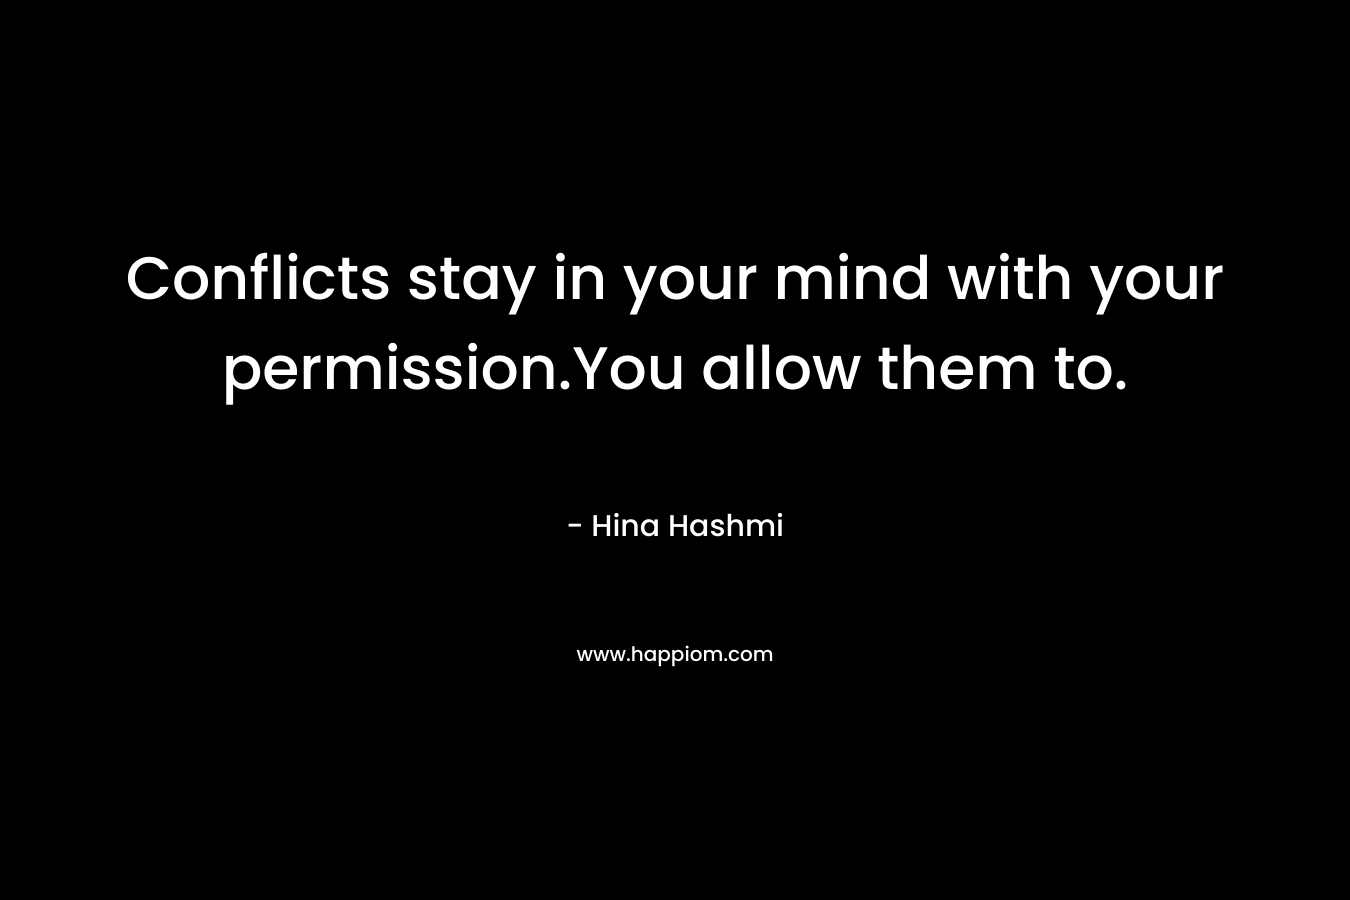 Conflicts stay in your mind with your permission.You allow them to. – Hina Hashmi